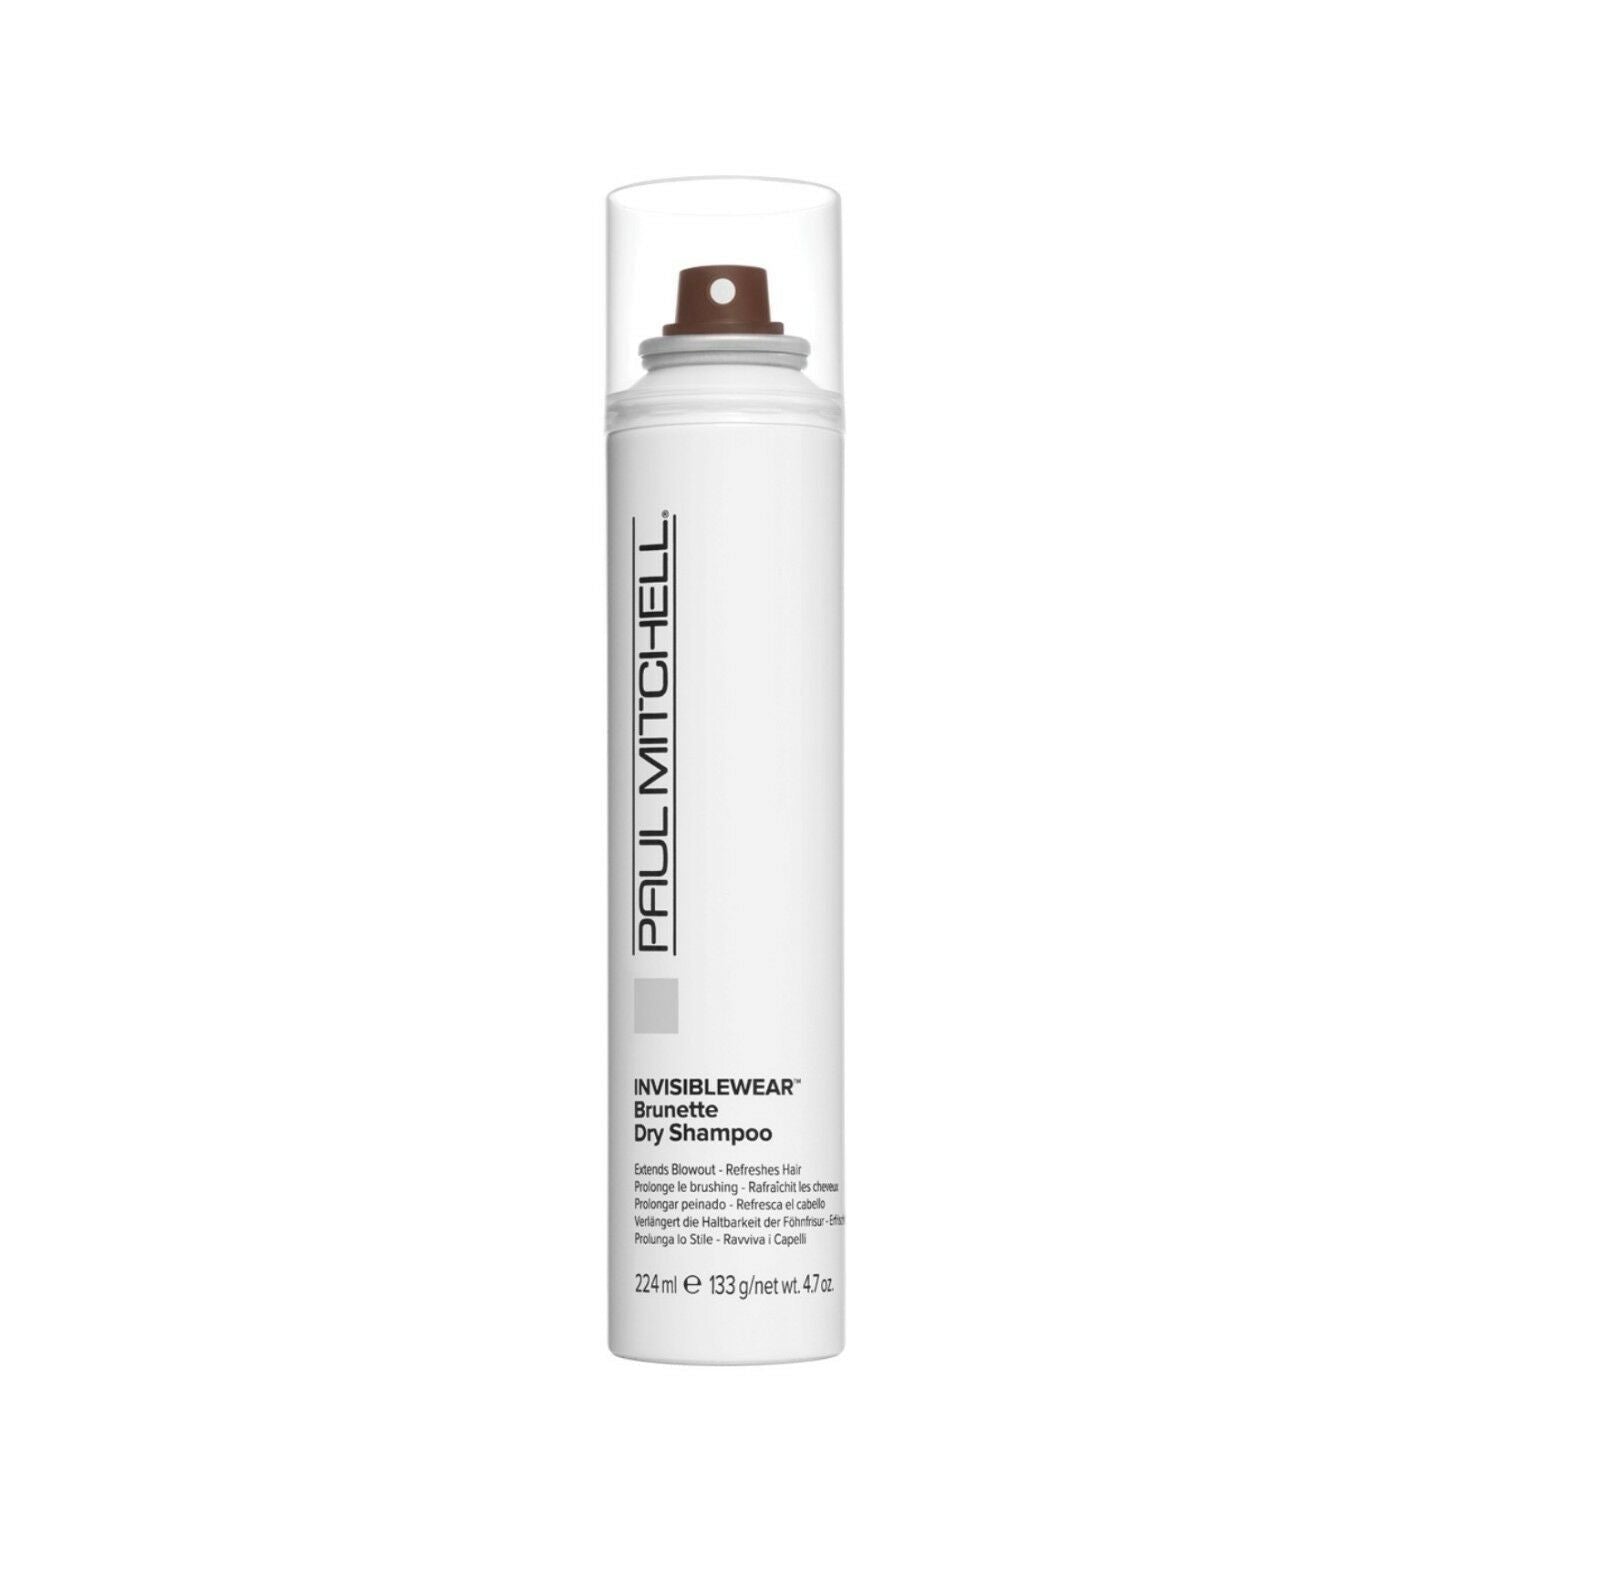 Paul Mitchell Invisiblewear Brunette Dry Shampoo Extends Blowout 224ml x 2 - On Line Hair Depot